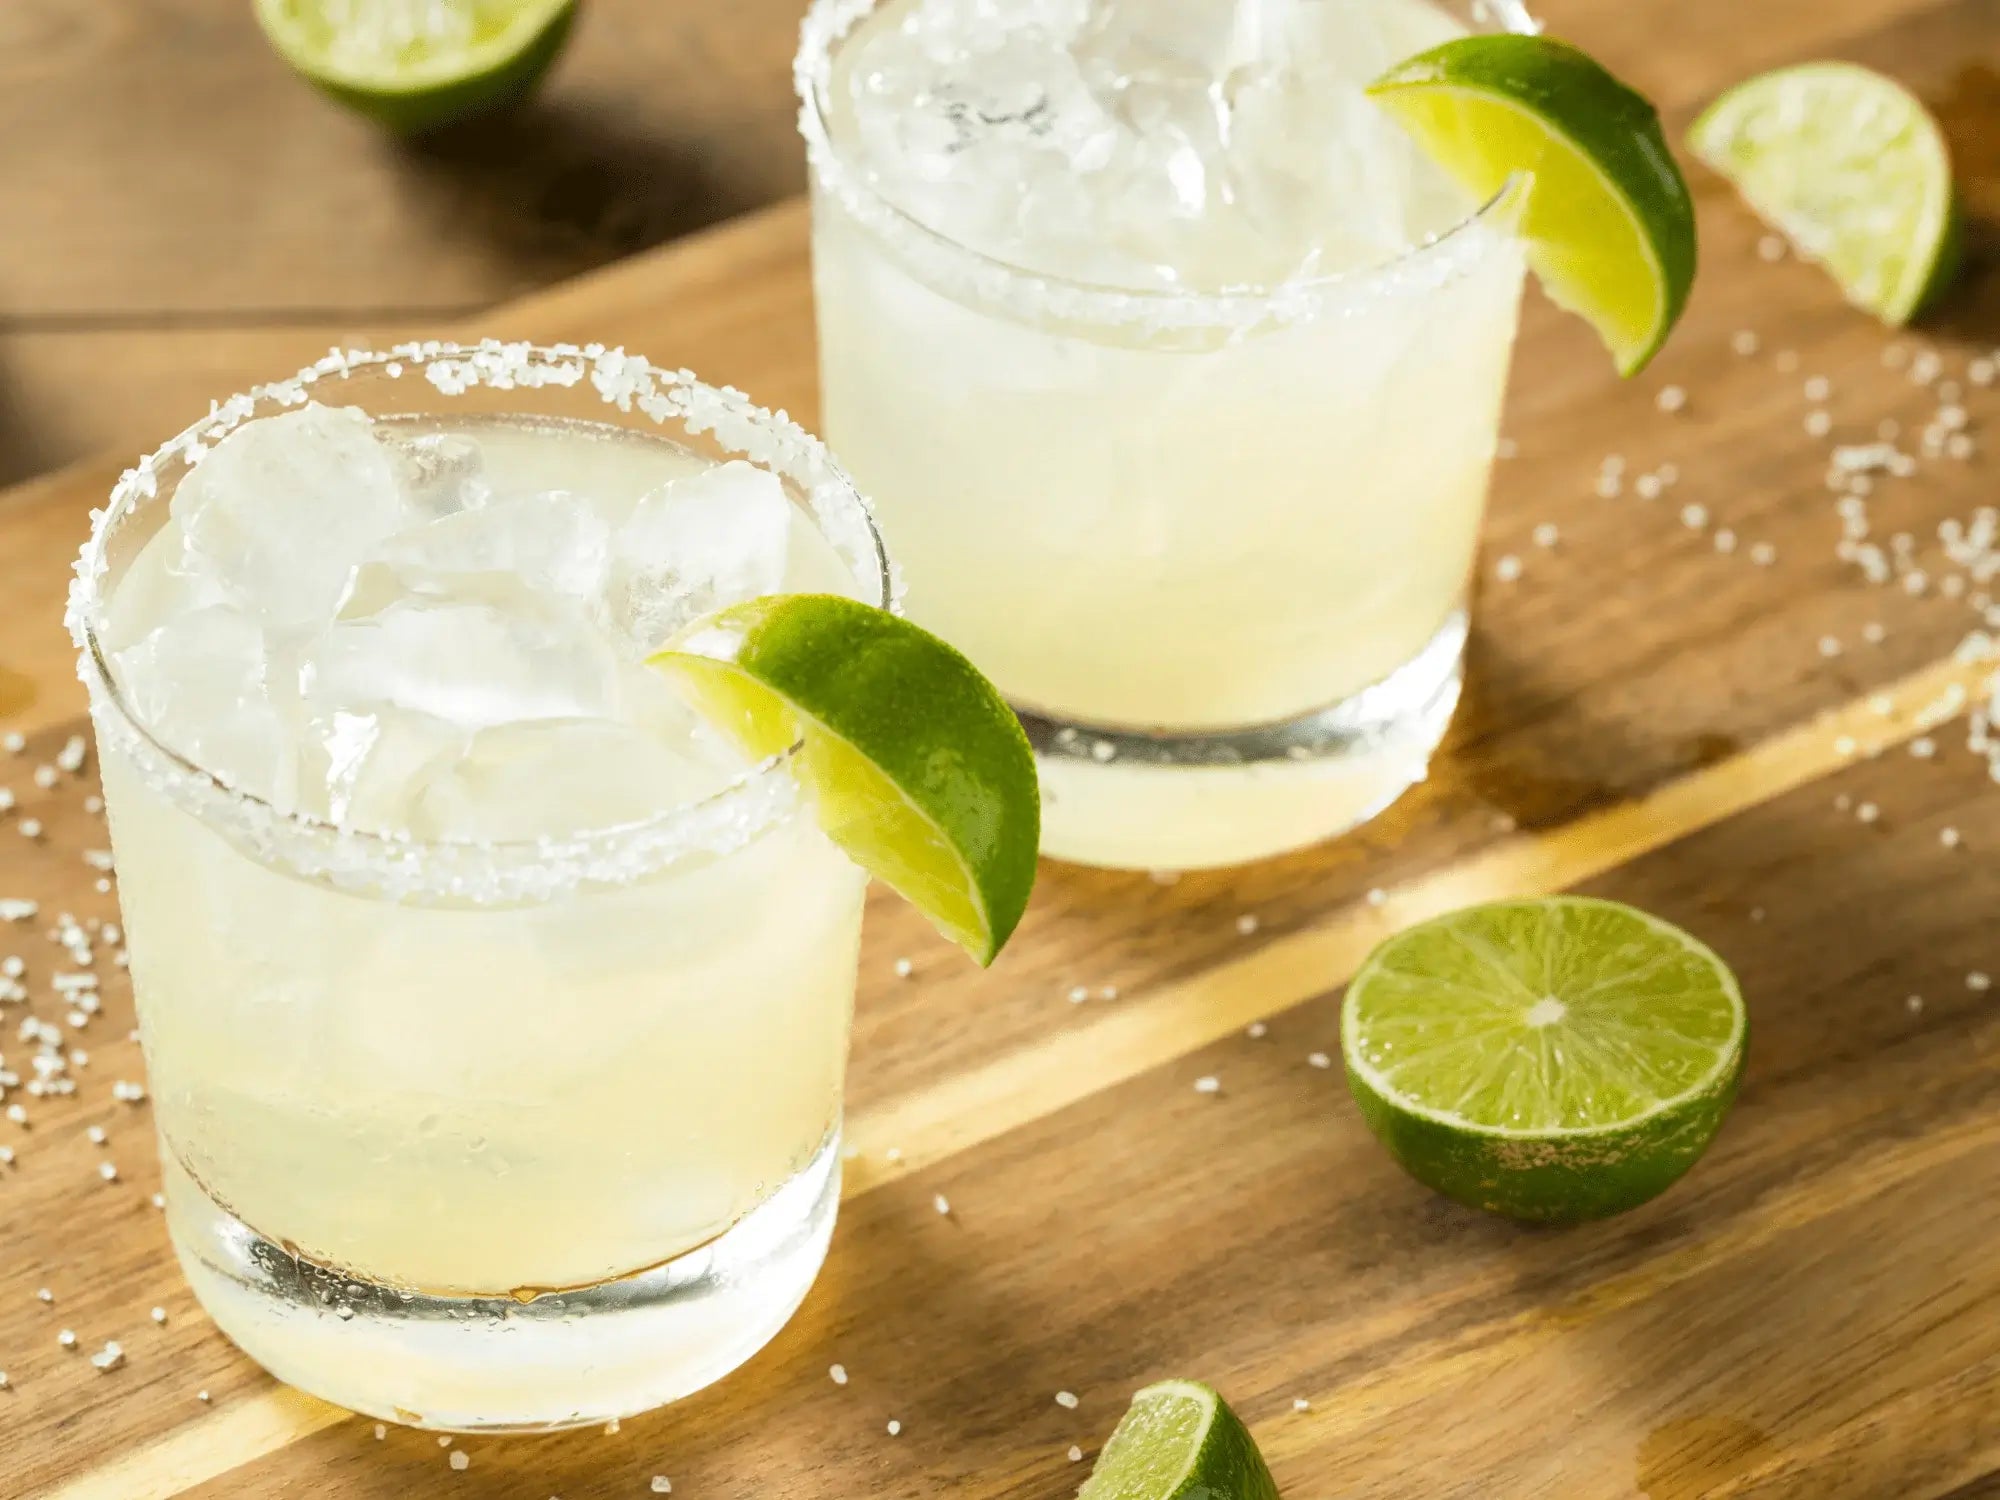 Margarita Mocktail made with Ms Sans Bring a Sombrero Non-Alcoholic Tequila and garnished with slices of lime